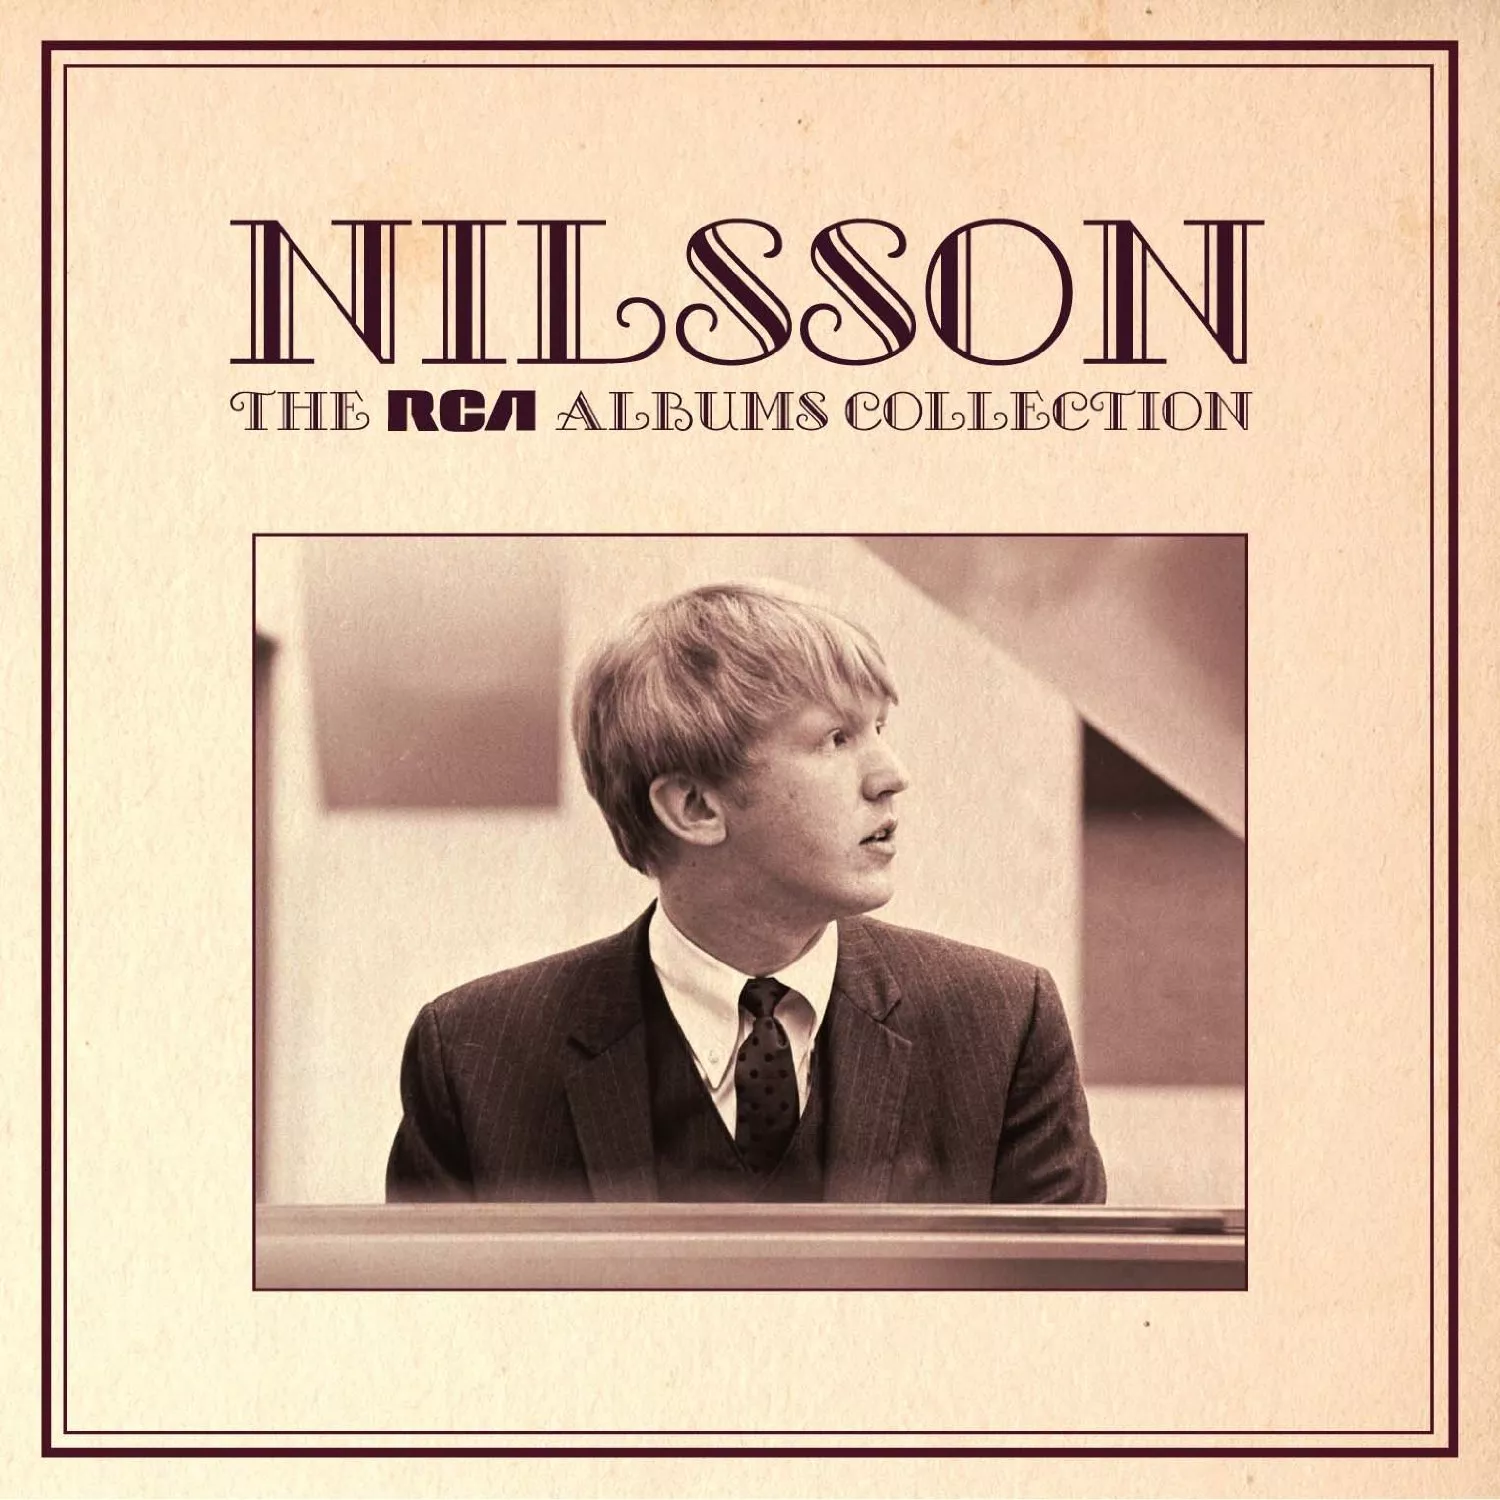 The Complete RCA Album Collection - Harry Nilsson